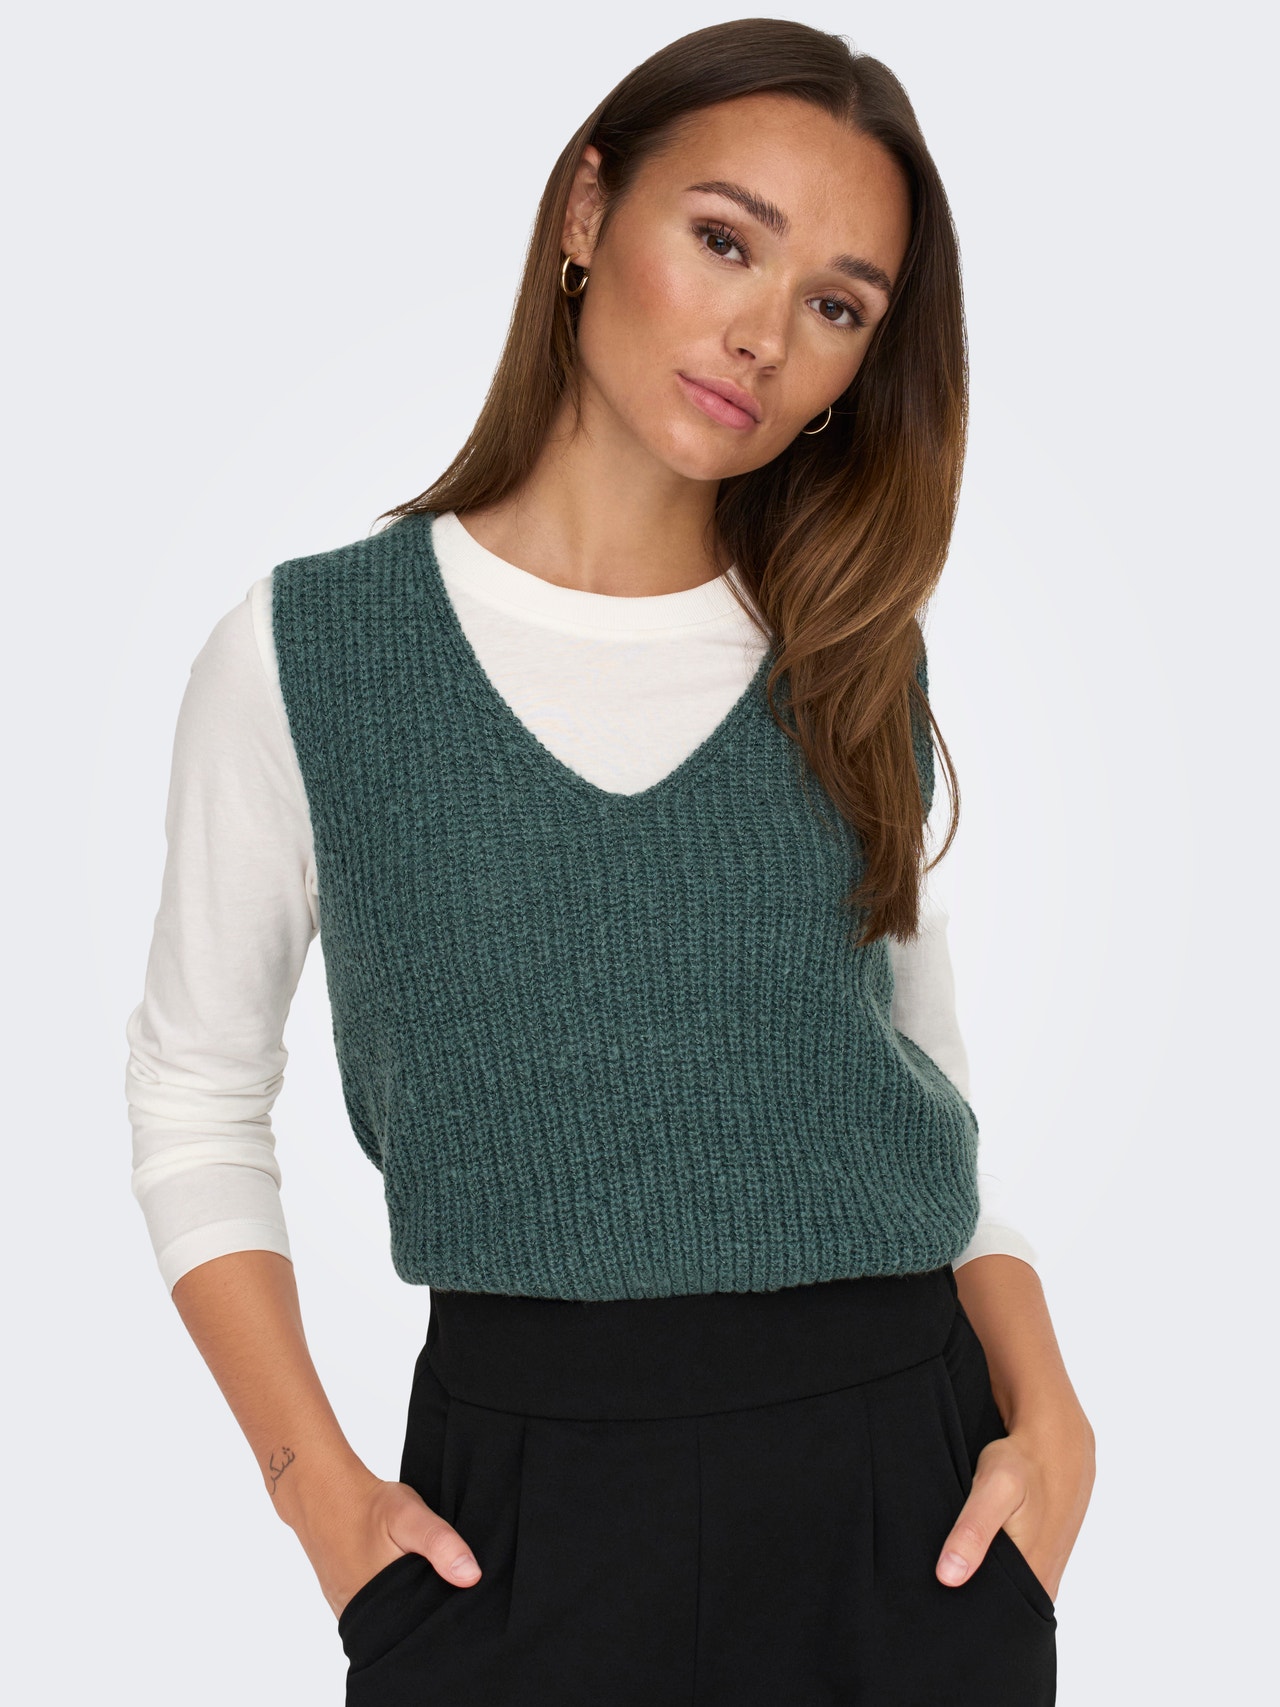 https://images.only.com/15300294/4338680/006/only-knittedvestwithv-neck-turquoise.jpg?v=c495c0e2083f86594d2502b2e7a6641a&format=webp&width=1280&quality=90&key=25-0-3